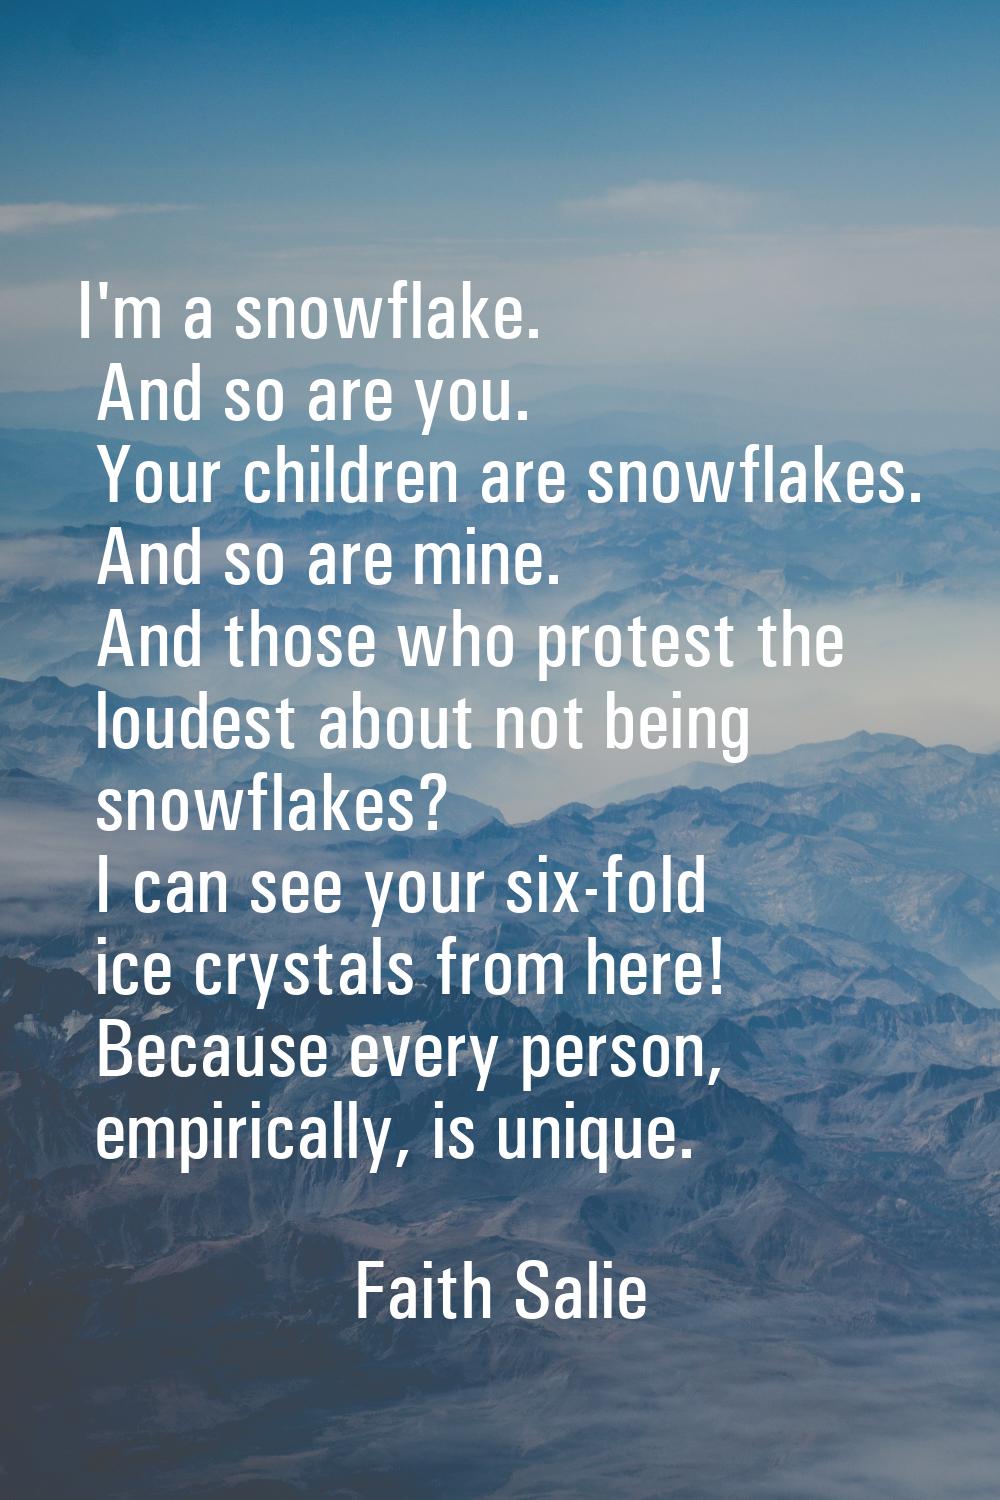 I'm a snowflake. And so are you. Your children are snowflakes. And so are mine. And those who prote